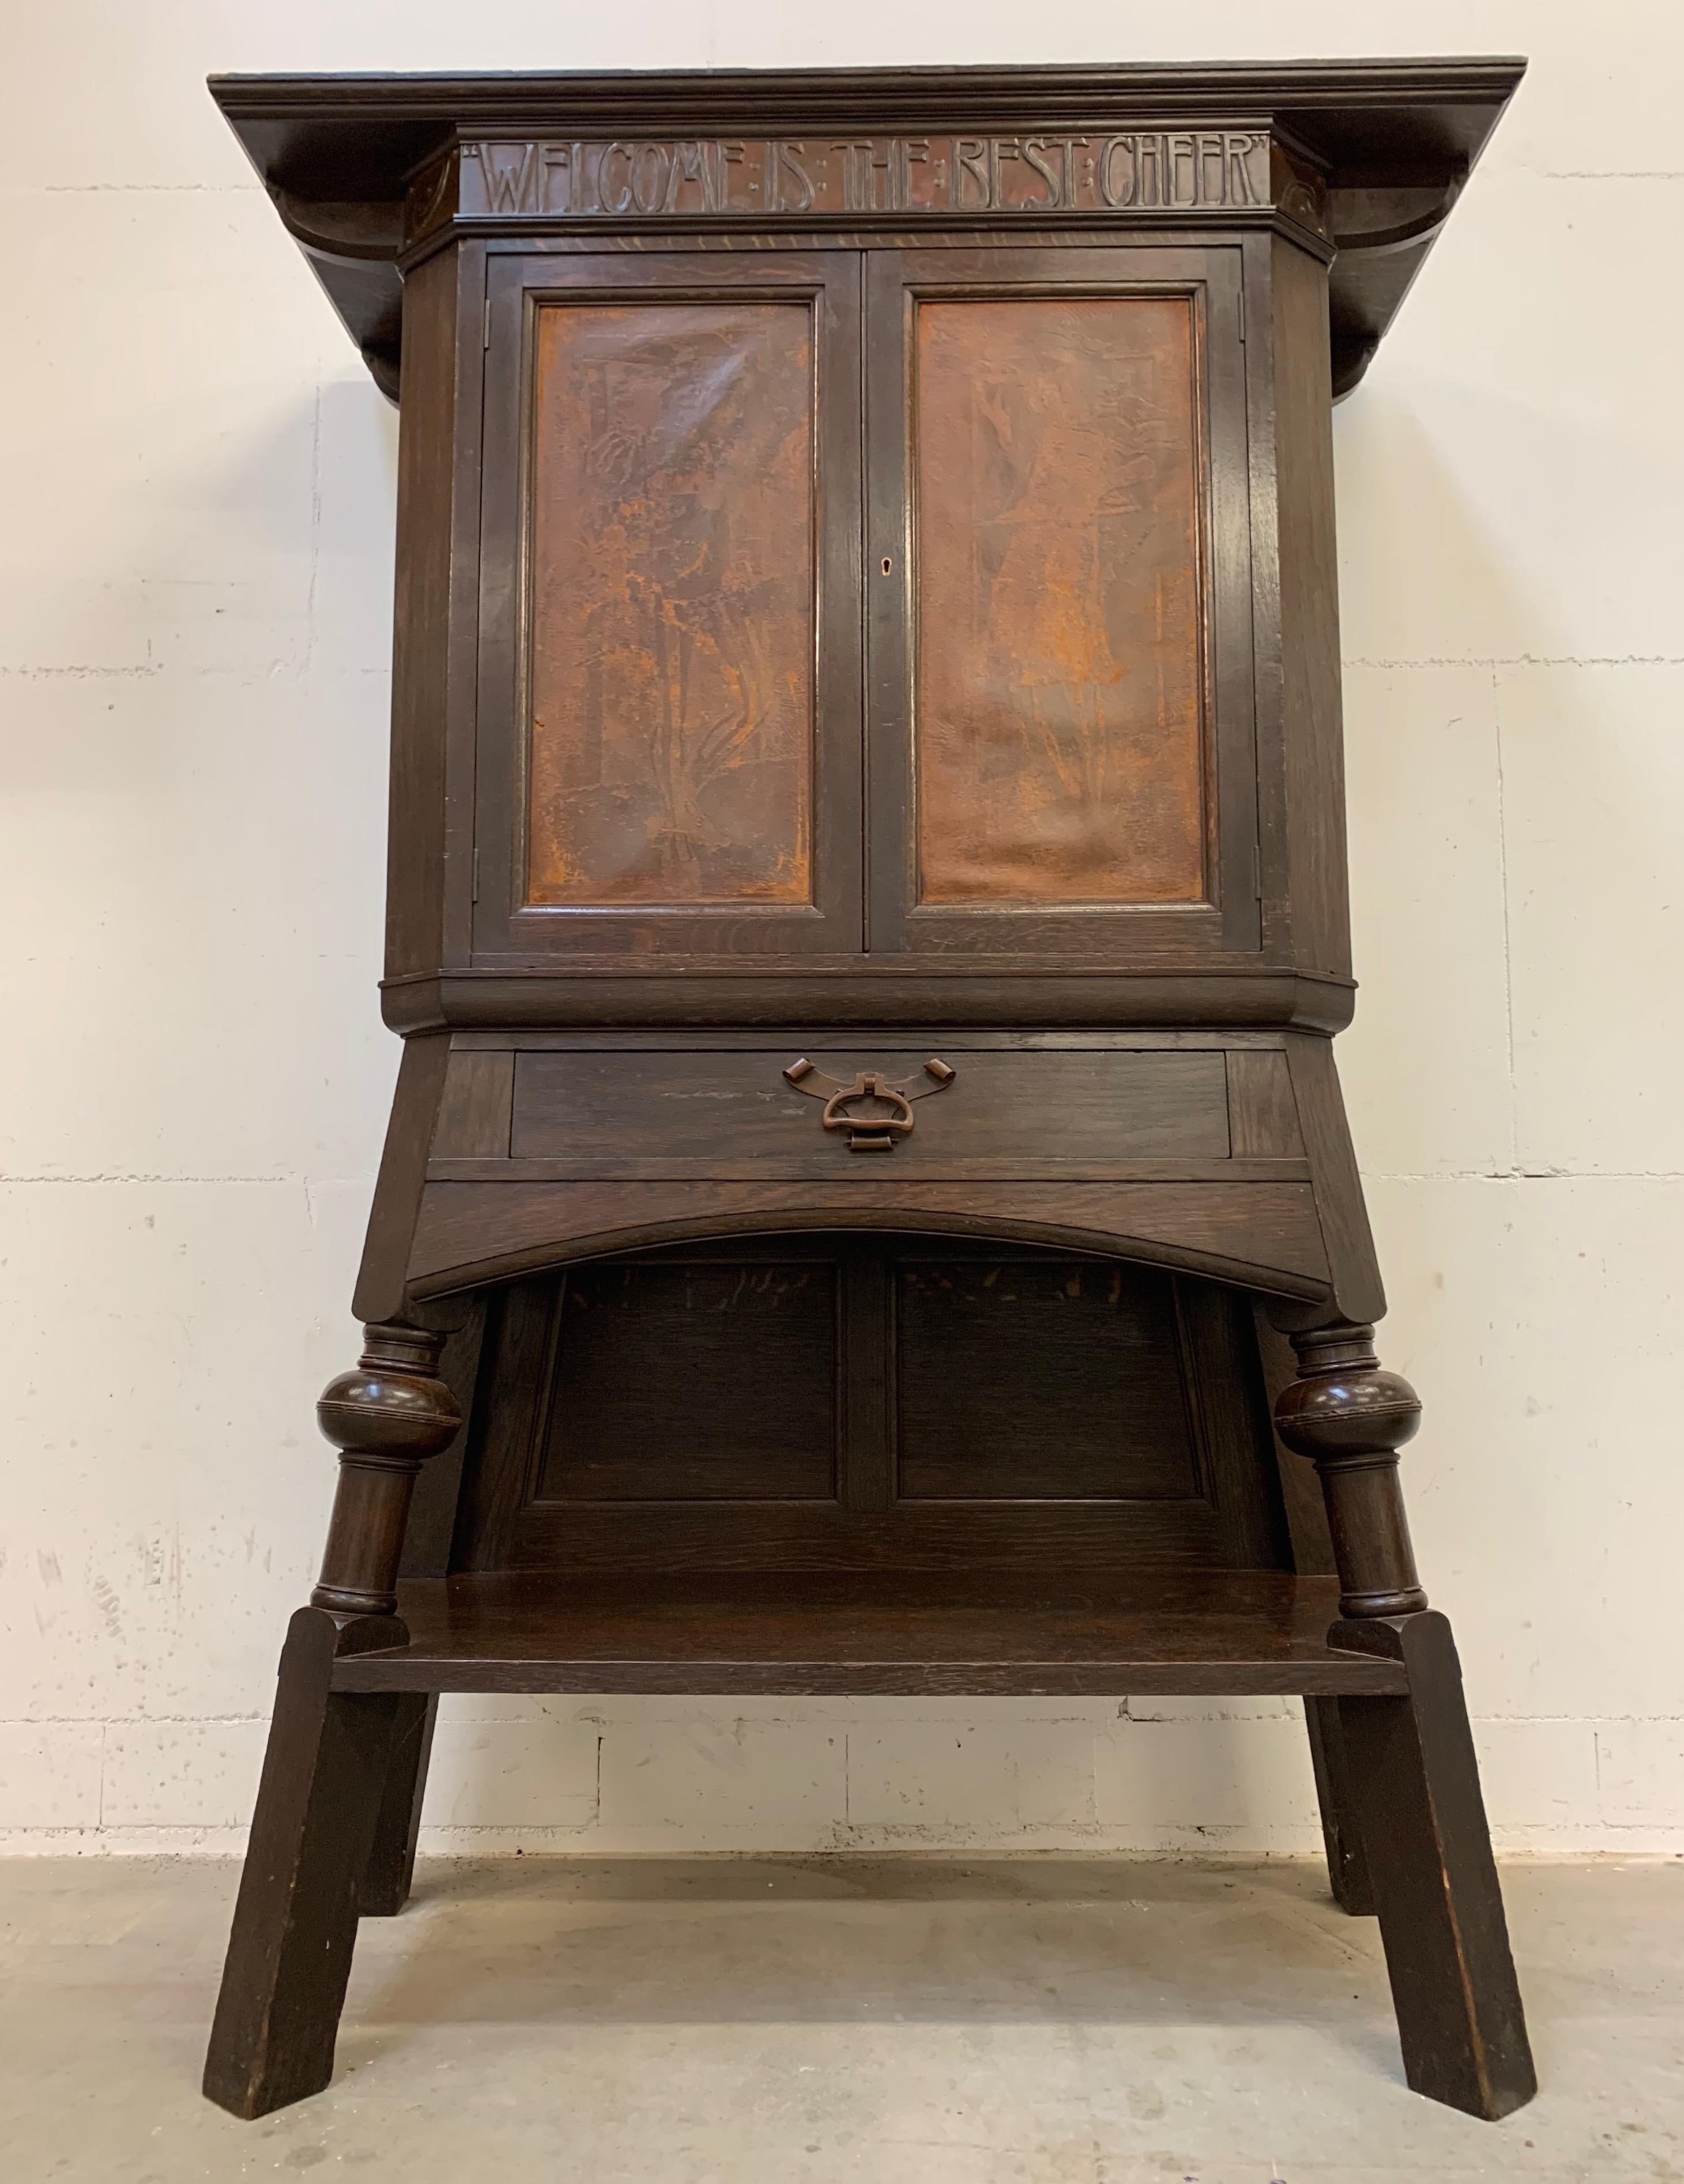 Stunning Arts and Crafts cupboard by one of the greatest.

We are certain that this wonderful handcrafted, stained oak cabinet was designed by Leonard Francis Wyburd (1865-1958). We are certain, because of several style elements that are typical for